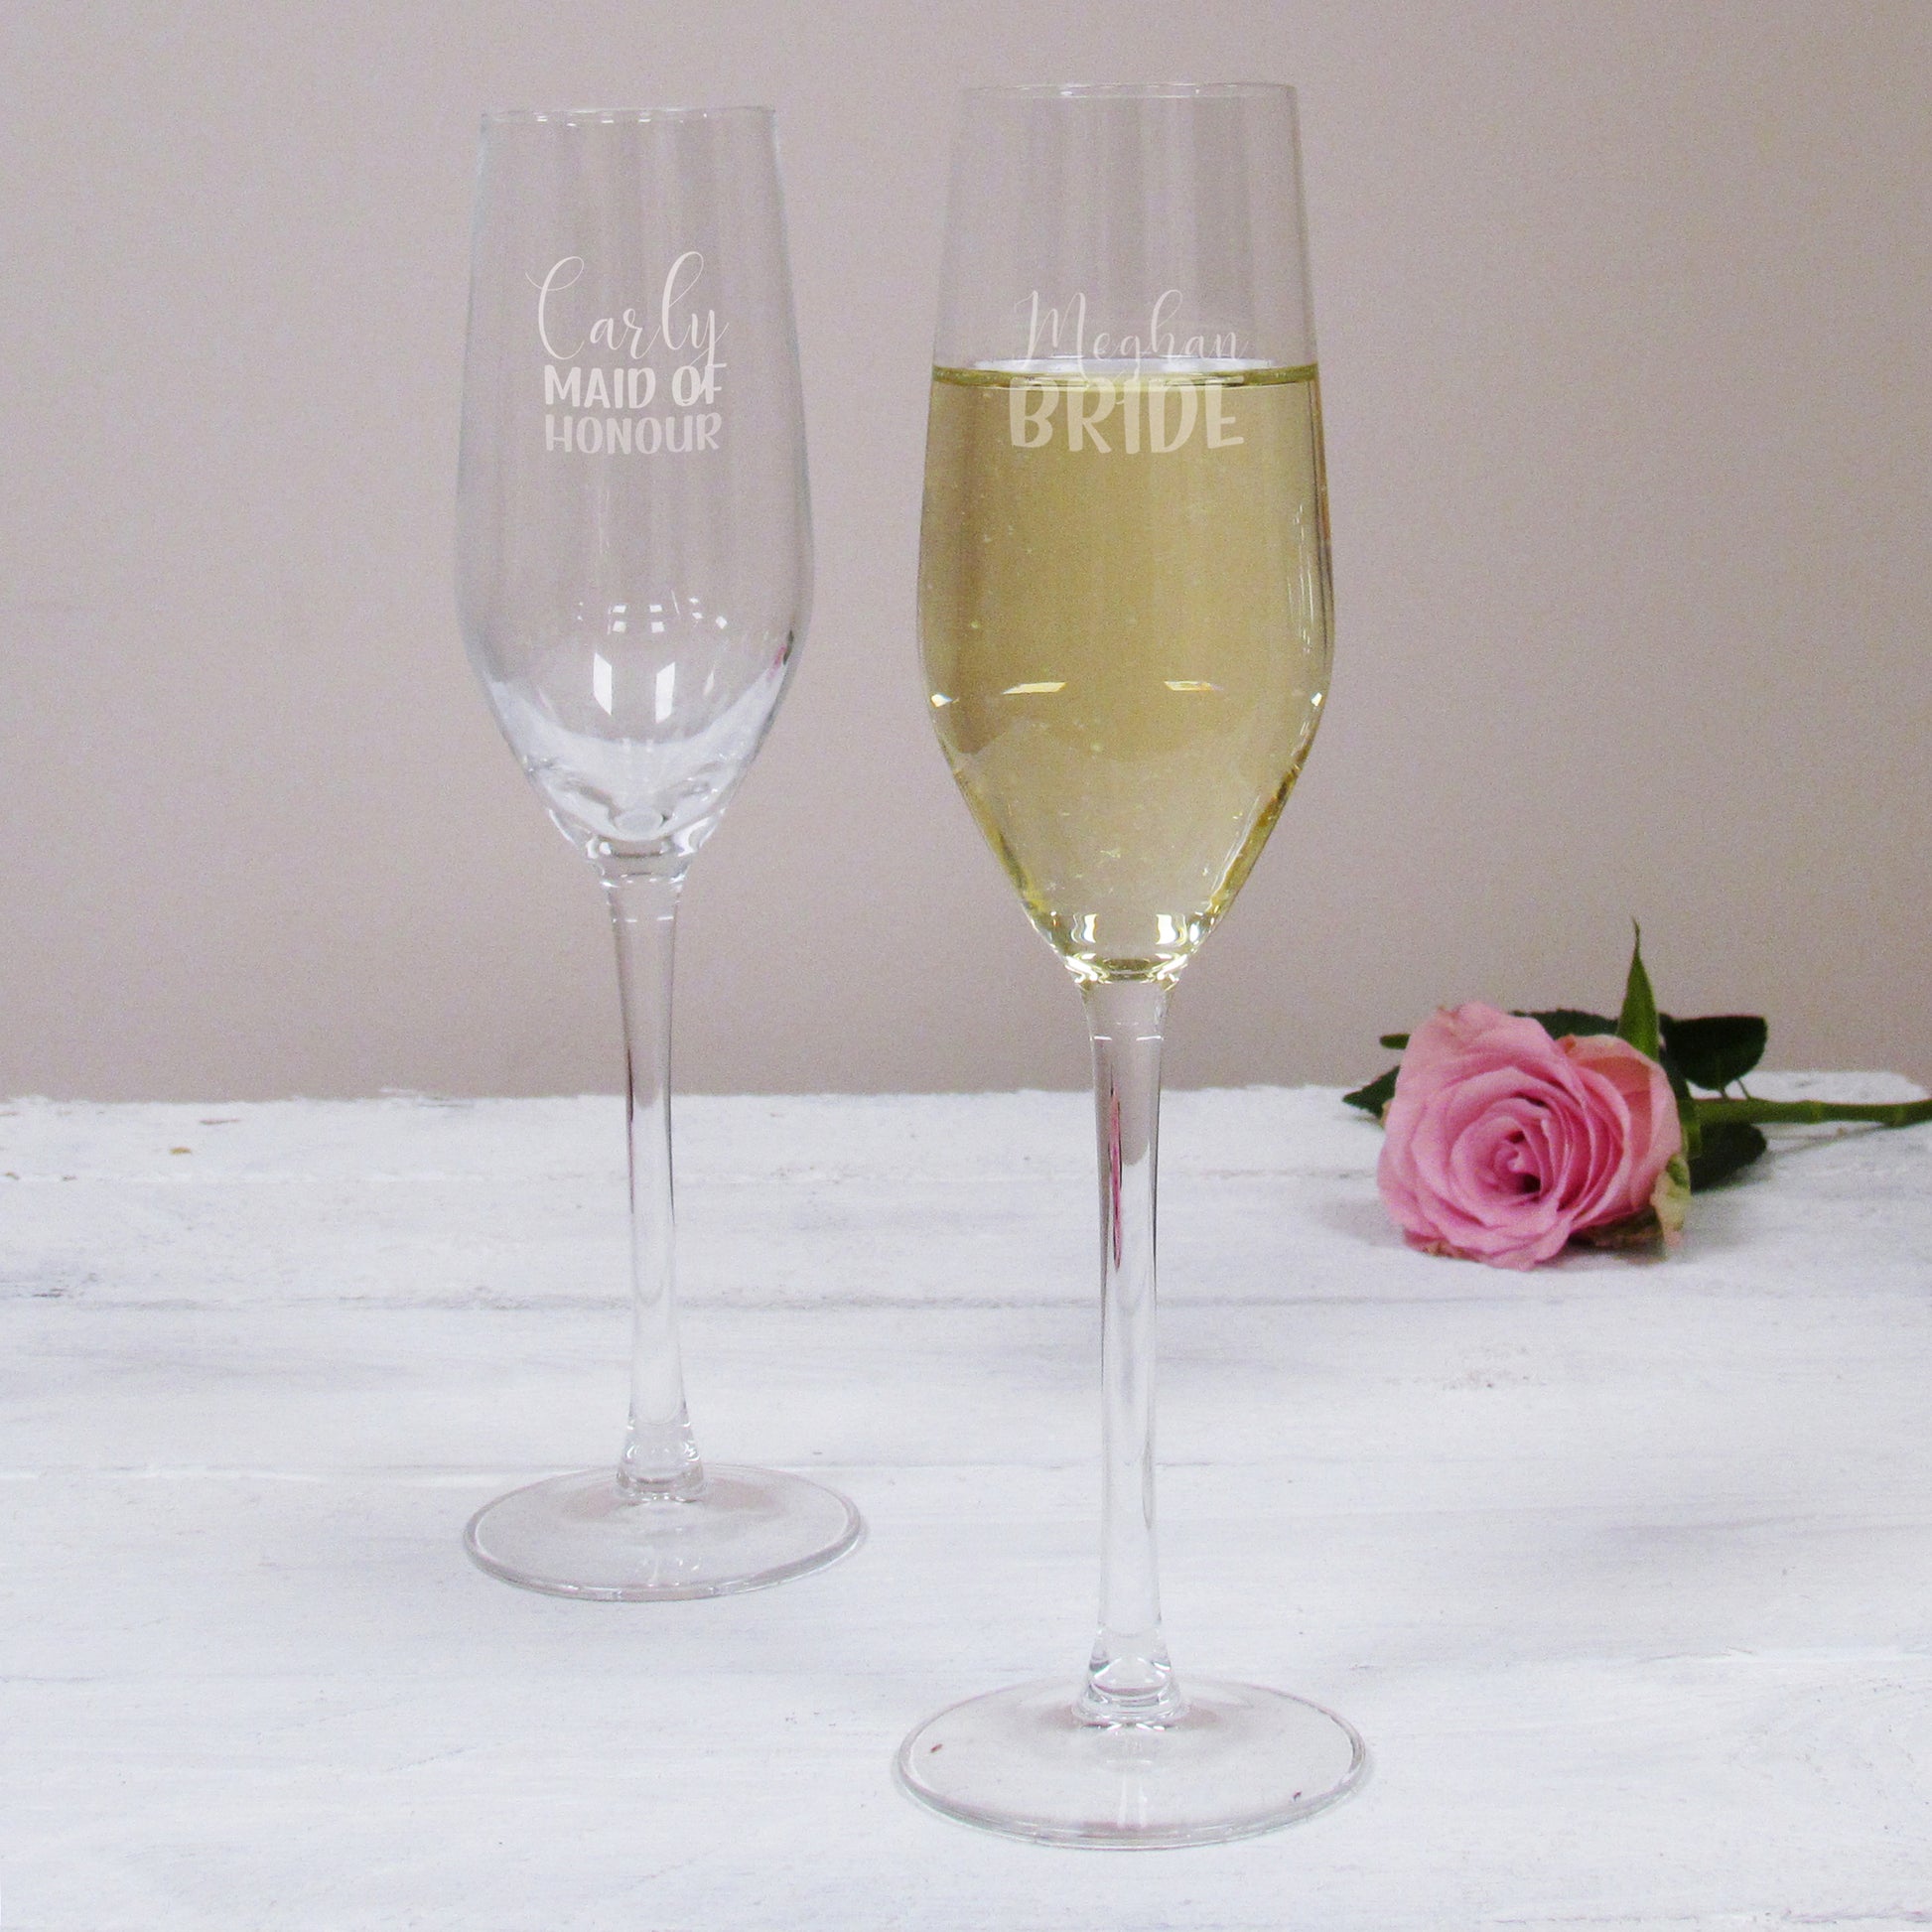 Personalised engraved Bride champagne prosecco flute